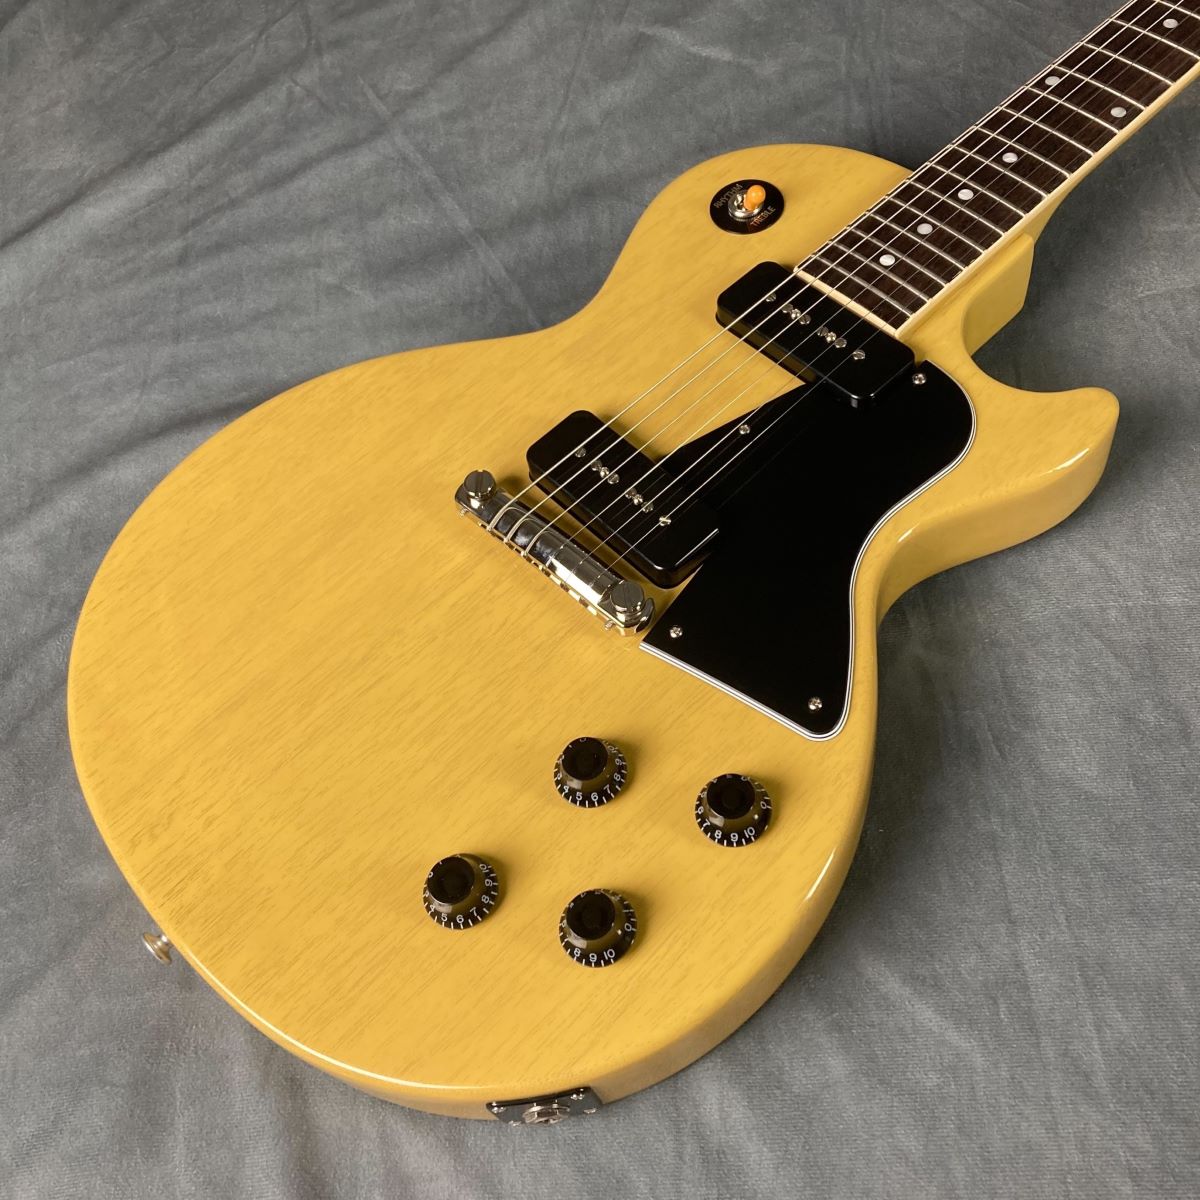 Gibson Les Paul Special ギブソン レスポールスペシャル - 楽器、器材